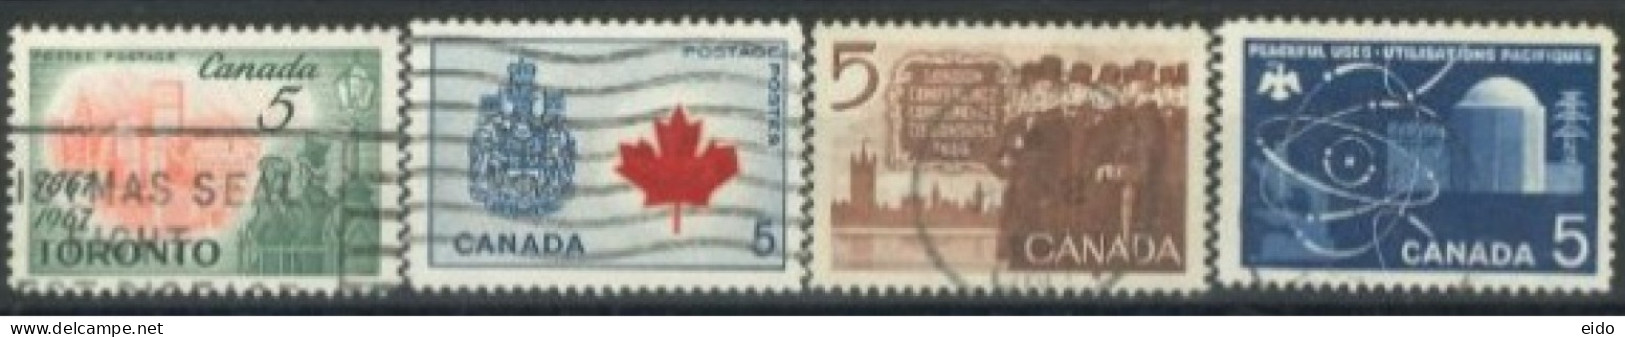 CANADA - 1964/67, STAMPS SET OF 4, USED. - Usados